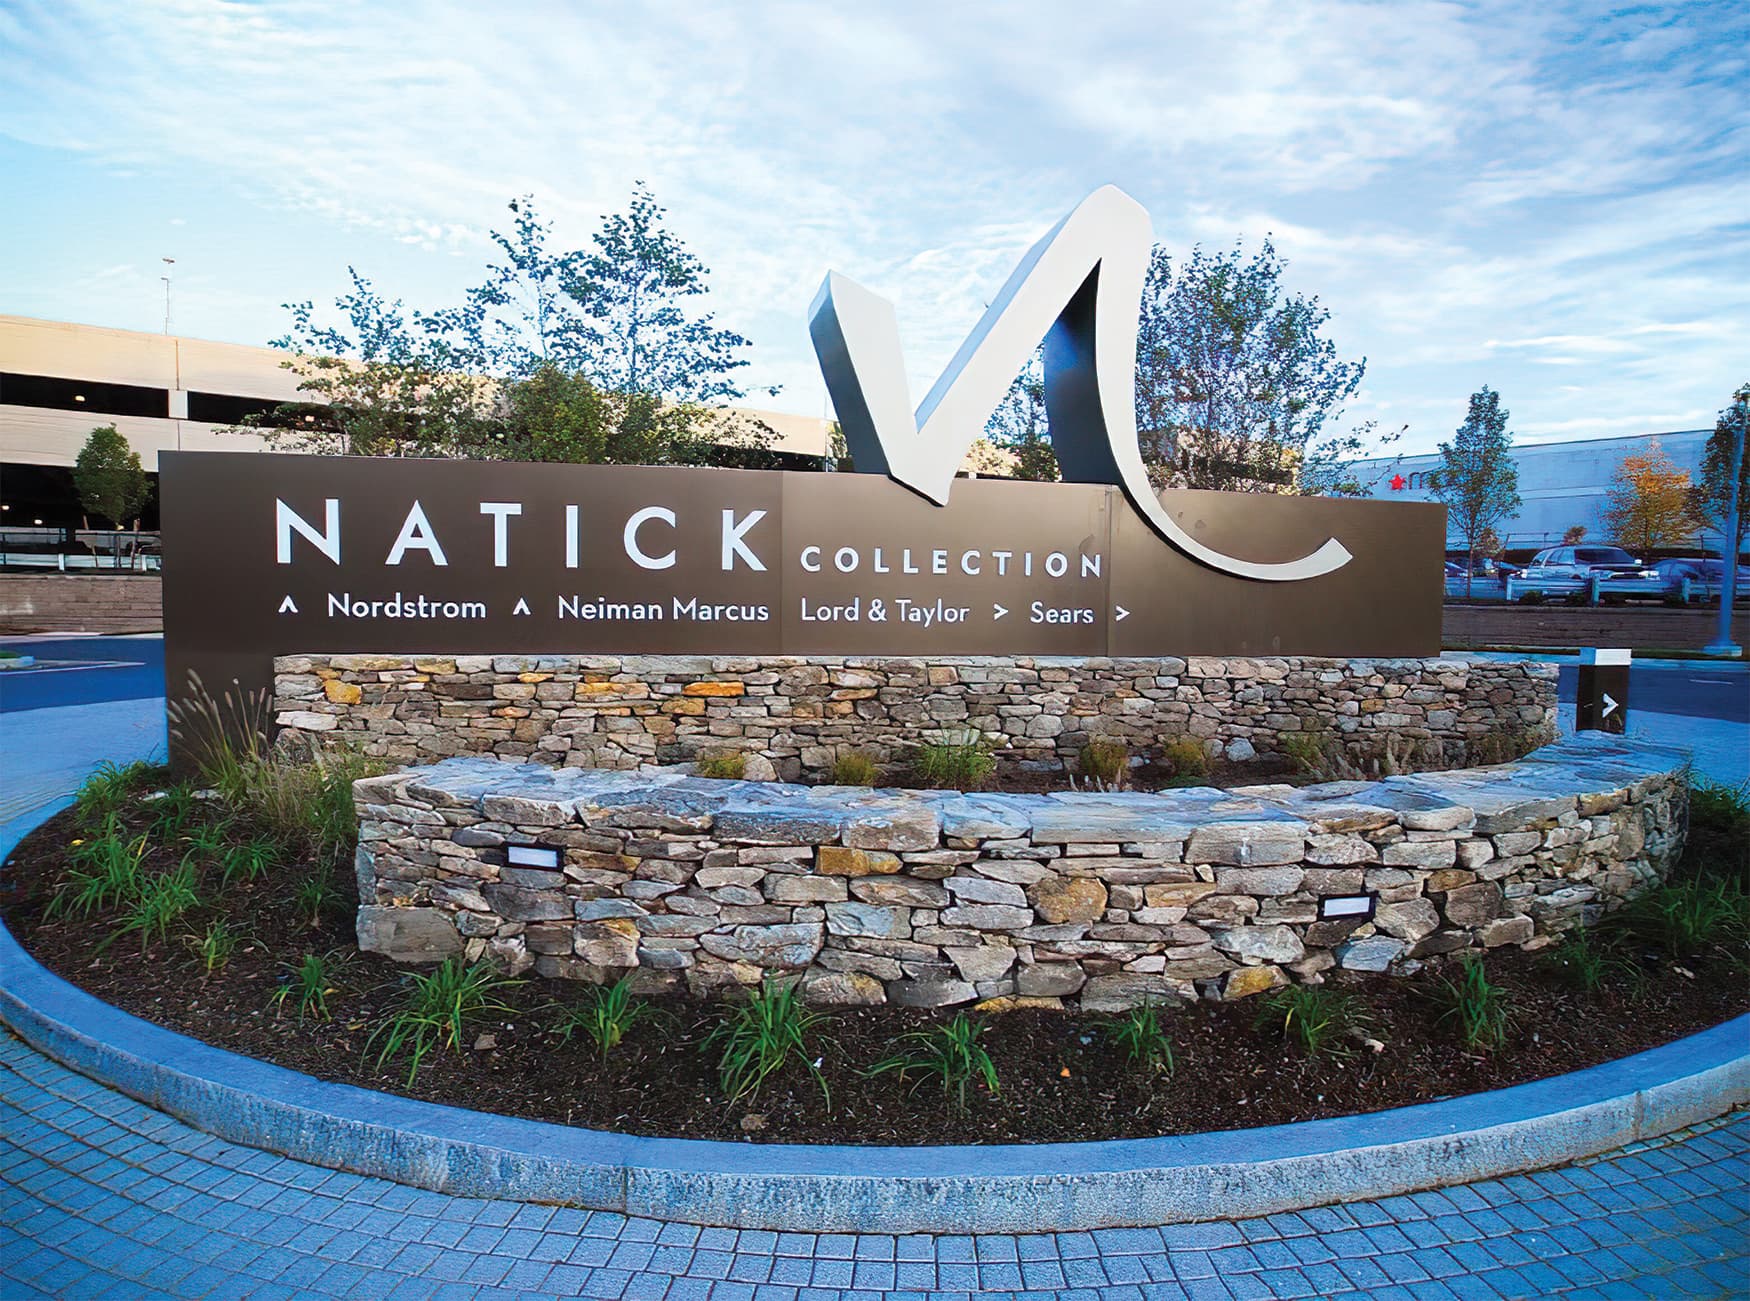 Natick Collection, New England's largest mixed-use retail destination, commissioned RSM Design to create a brand identity as well as a placemaking, identity, and wayfinding features. Project Identity Monument. 